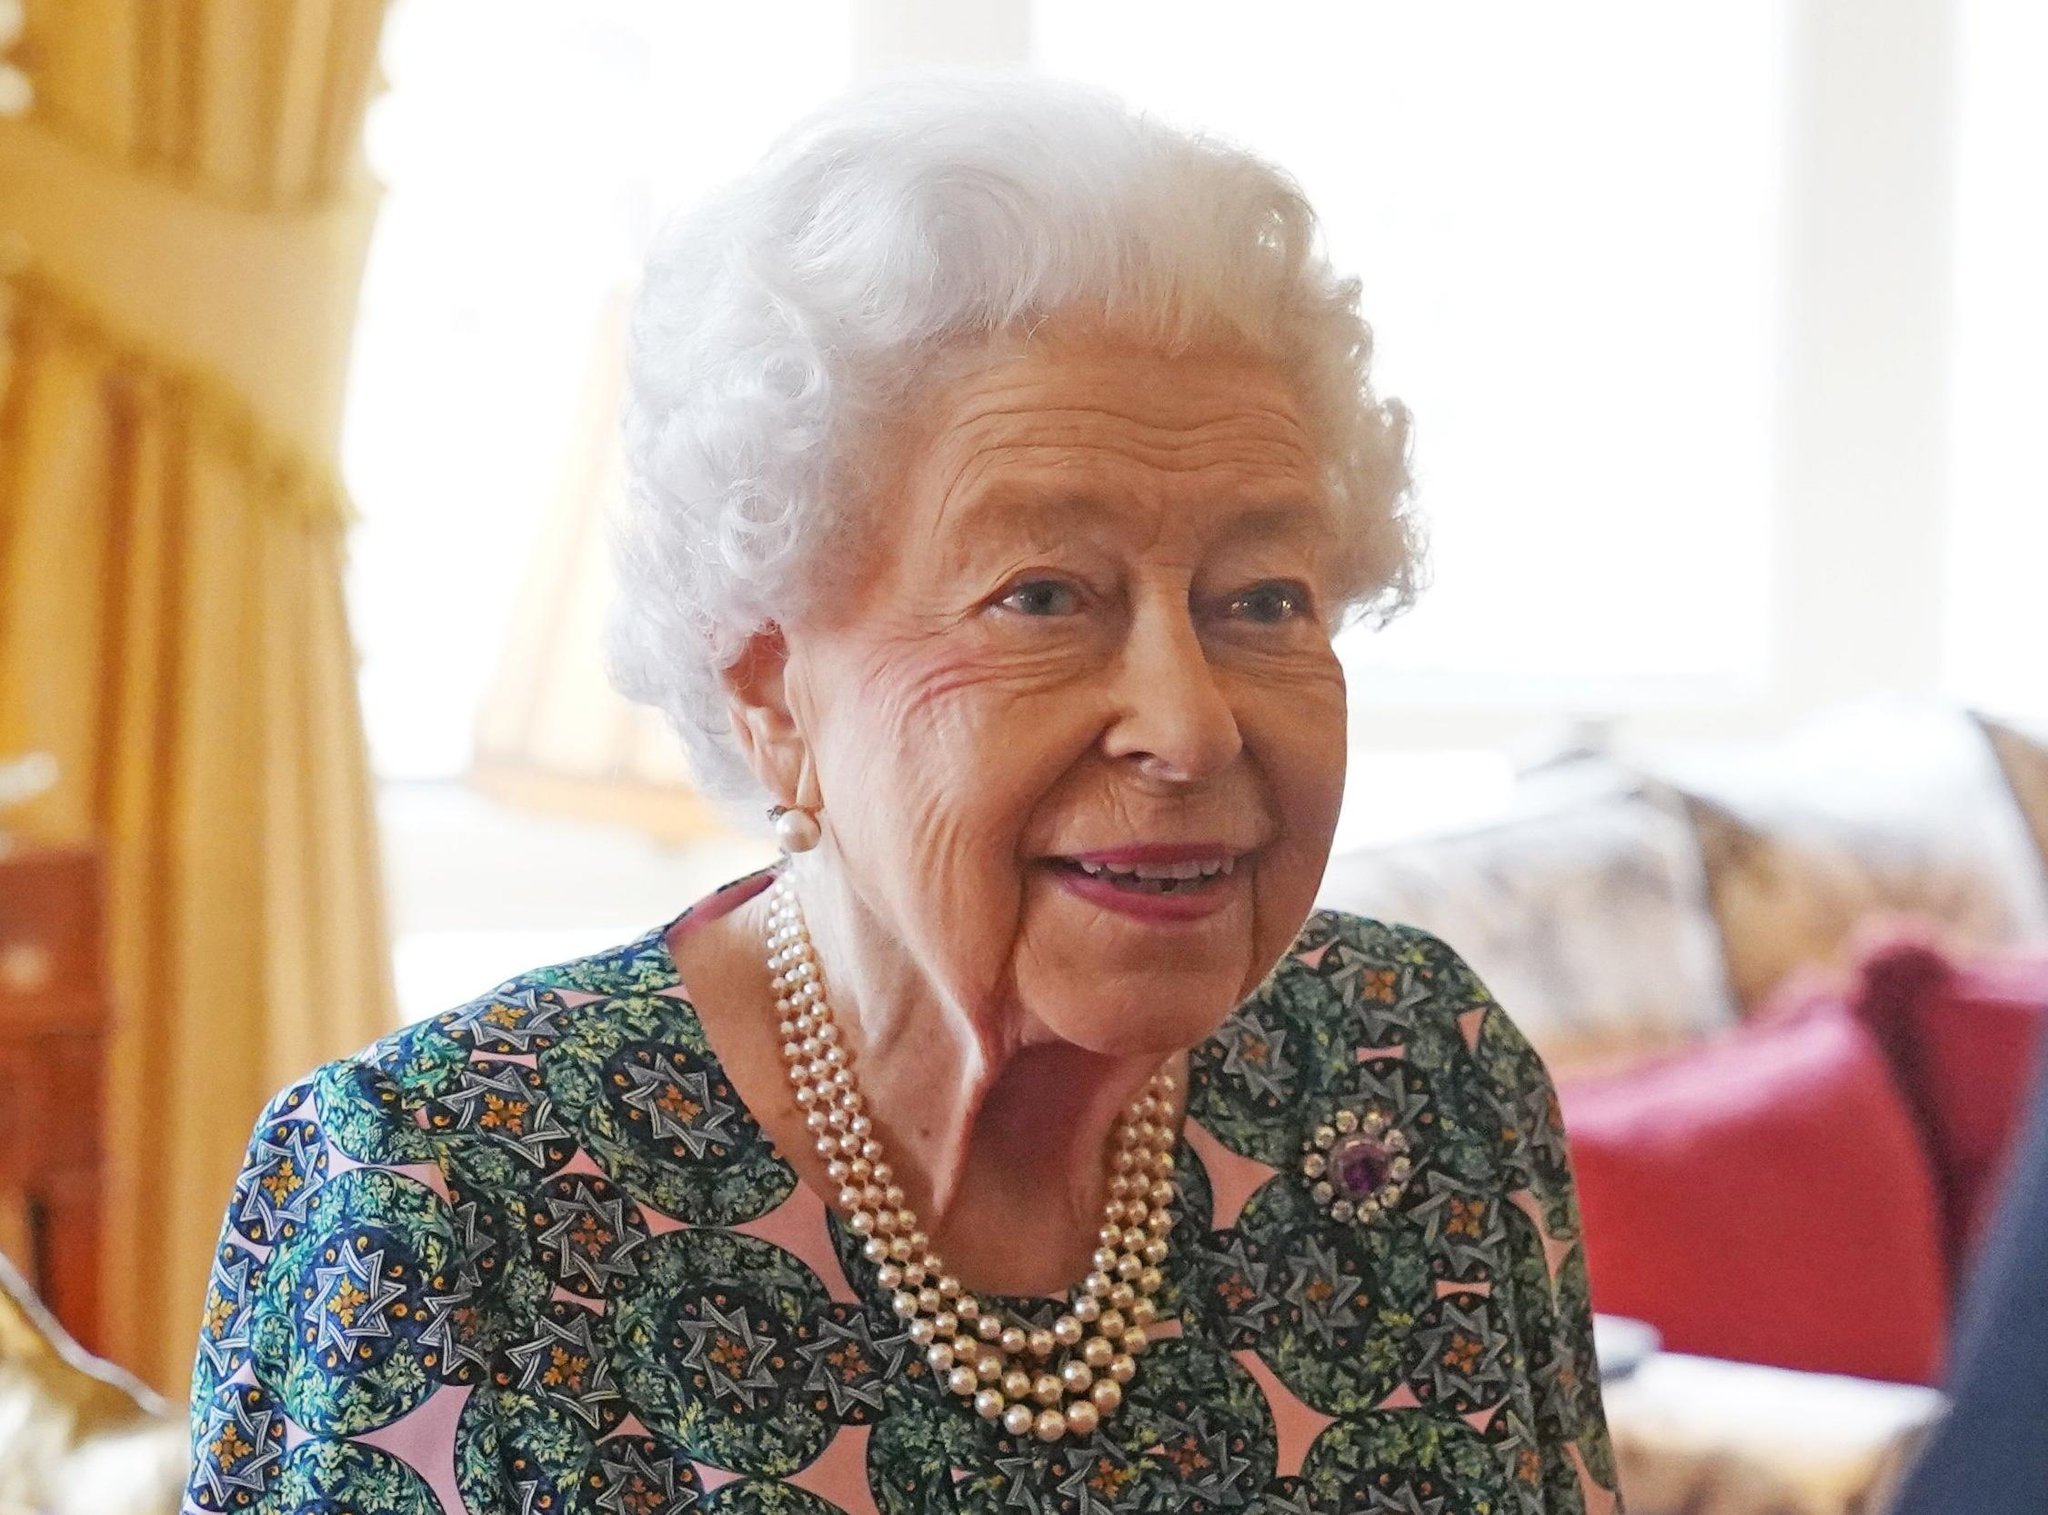 Queen will stay as head of state in an independent Scotland, says SNP